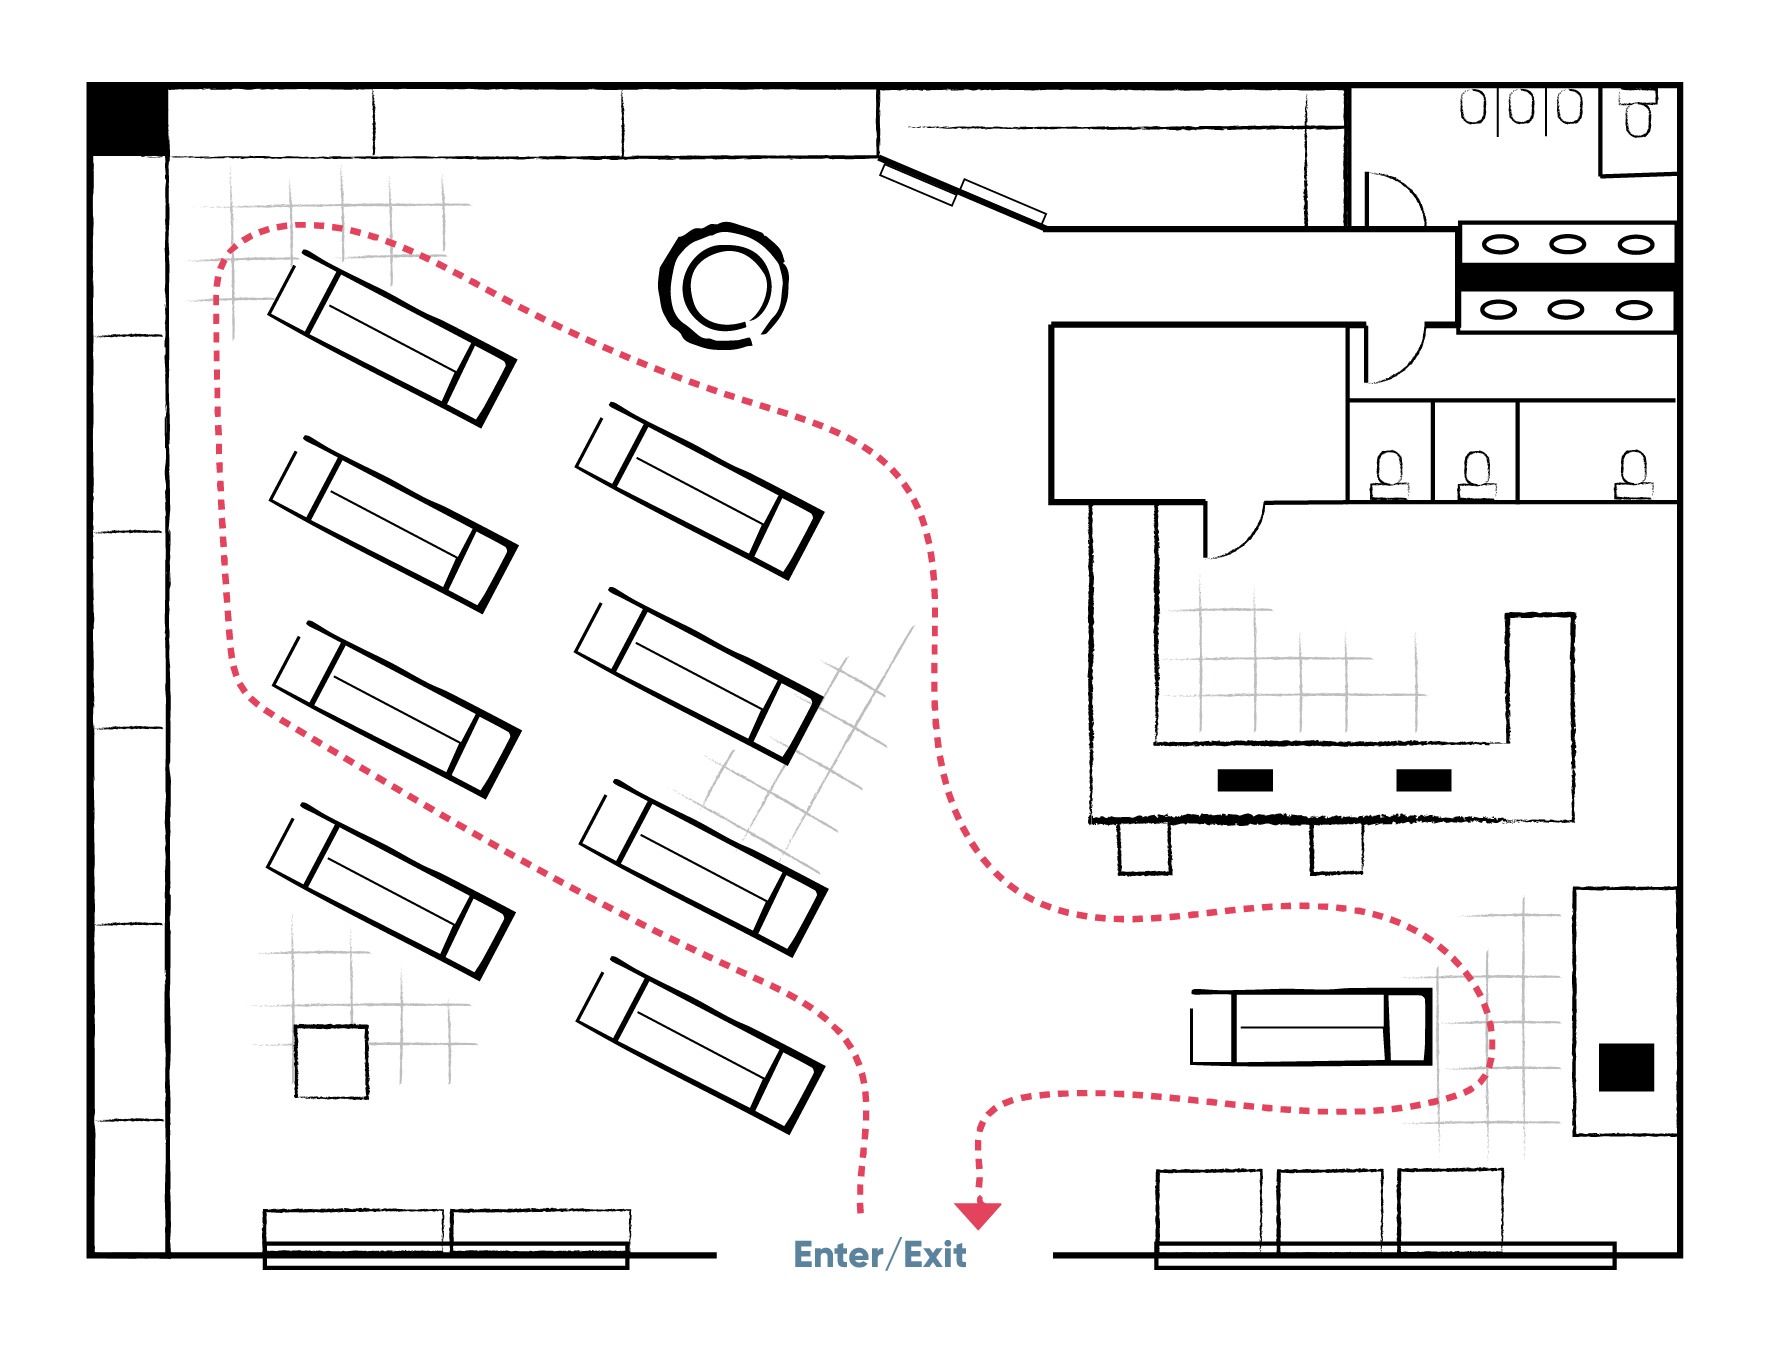 The Ultimate Guide to Designing an Engaging Retail Store Layout